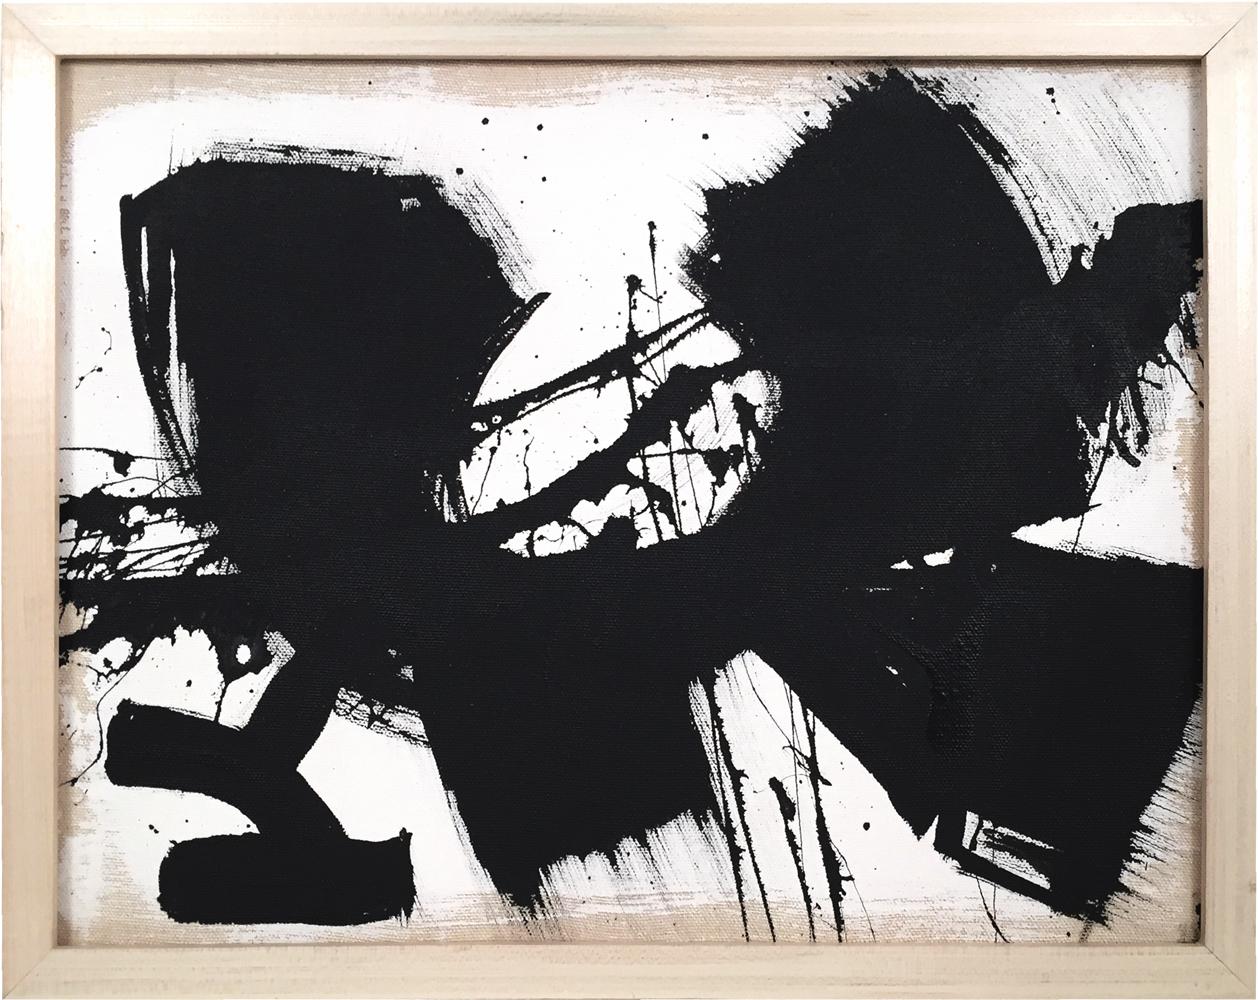 This black and white abstract acrylic on canvas is enhanced by the energy of black splashes across the canvas.  The raw canvas edges balance the contrast of the bright white background softening the piece.  This work is beautifully framed in an